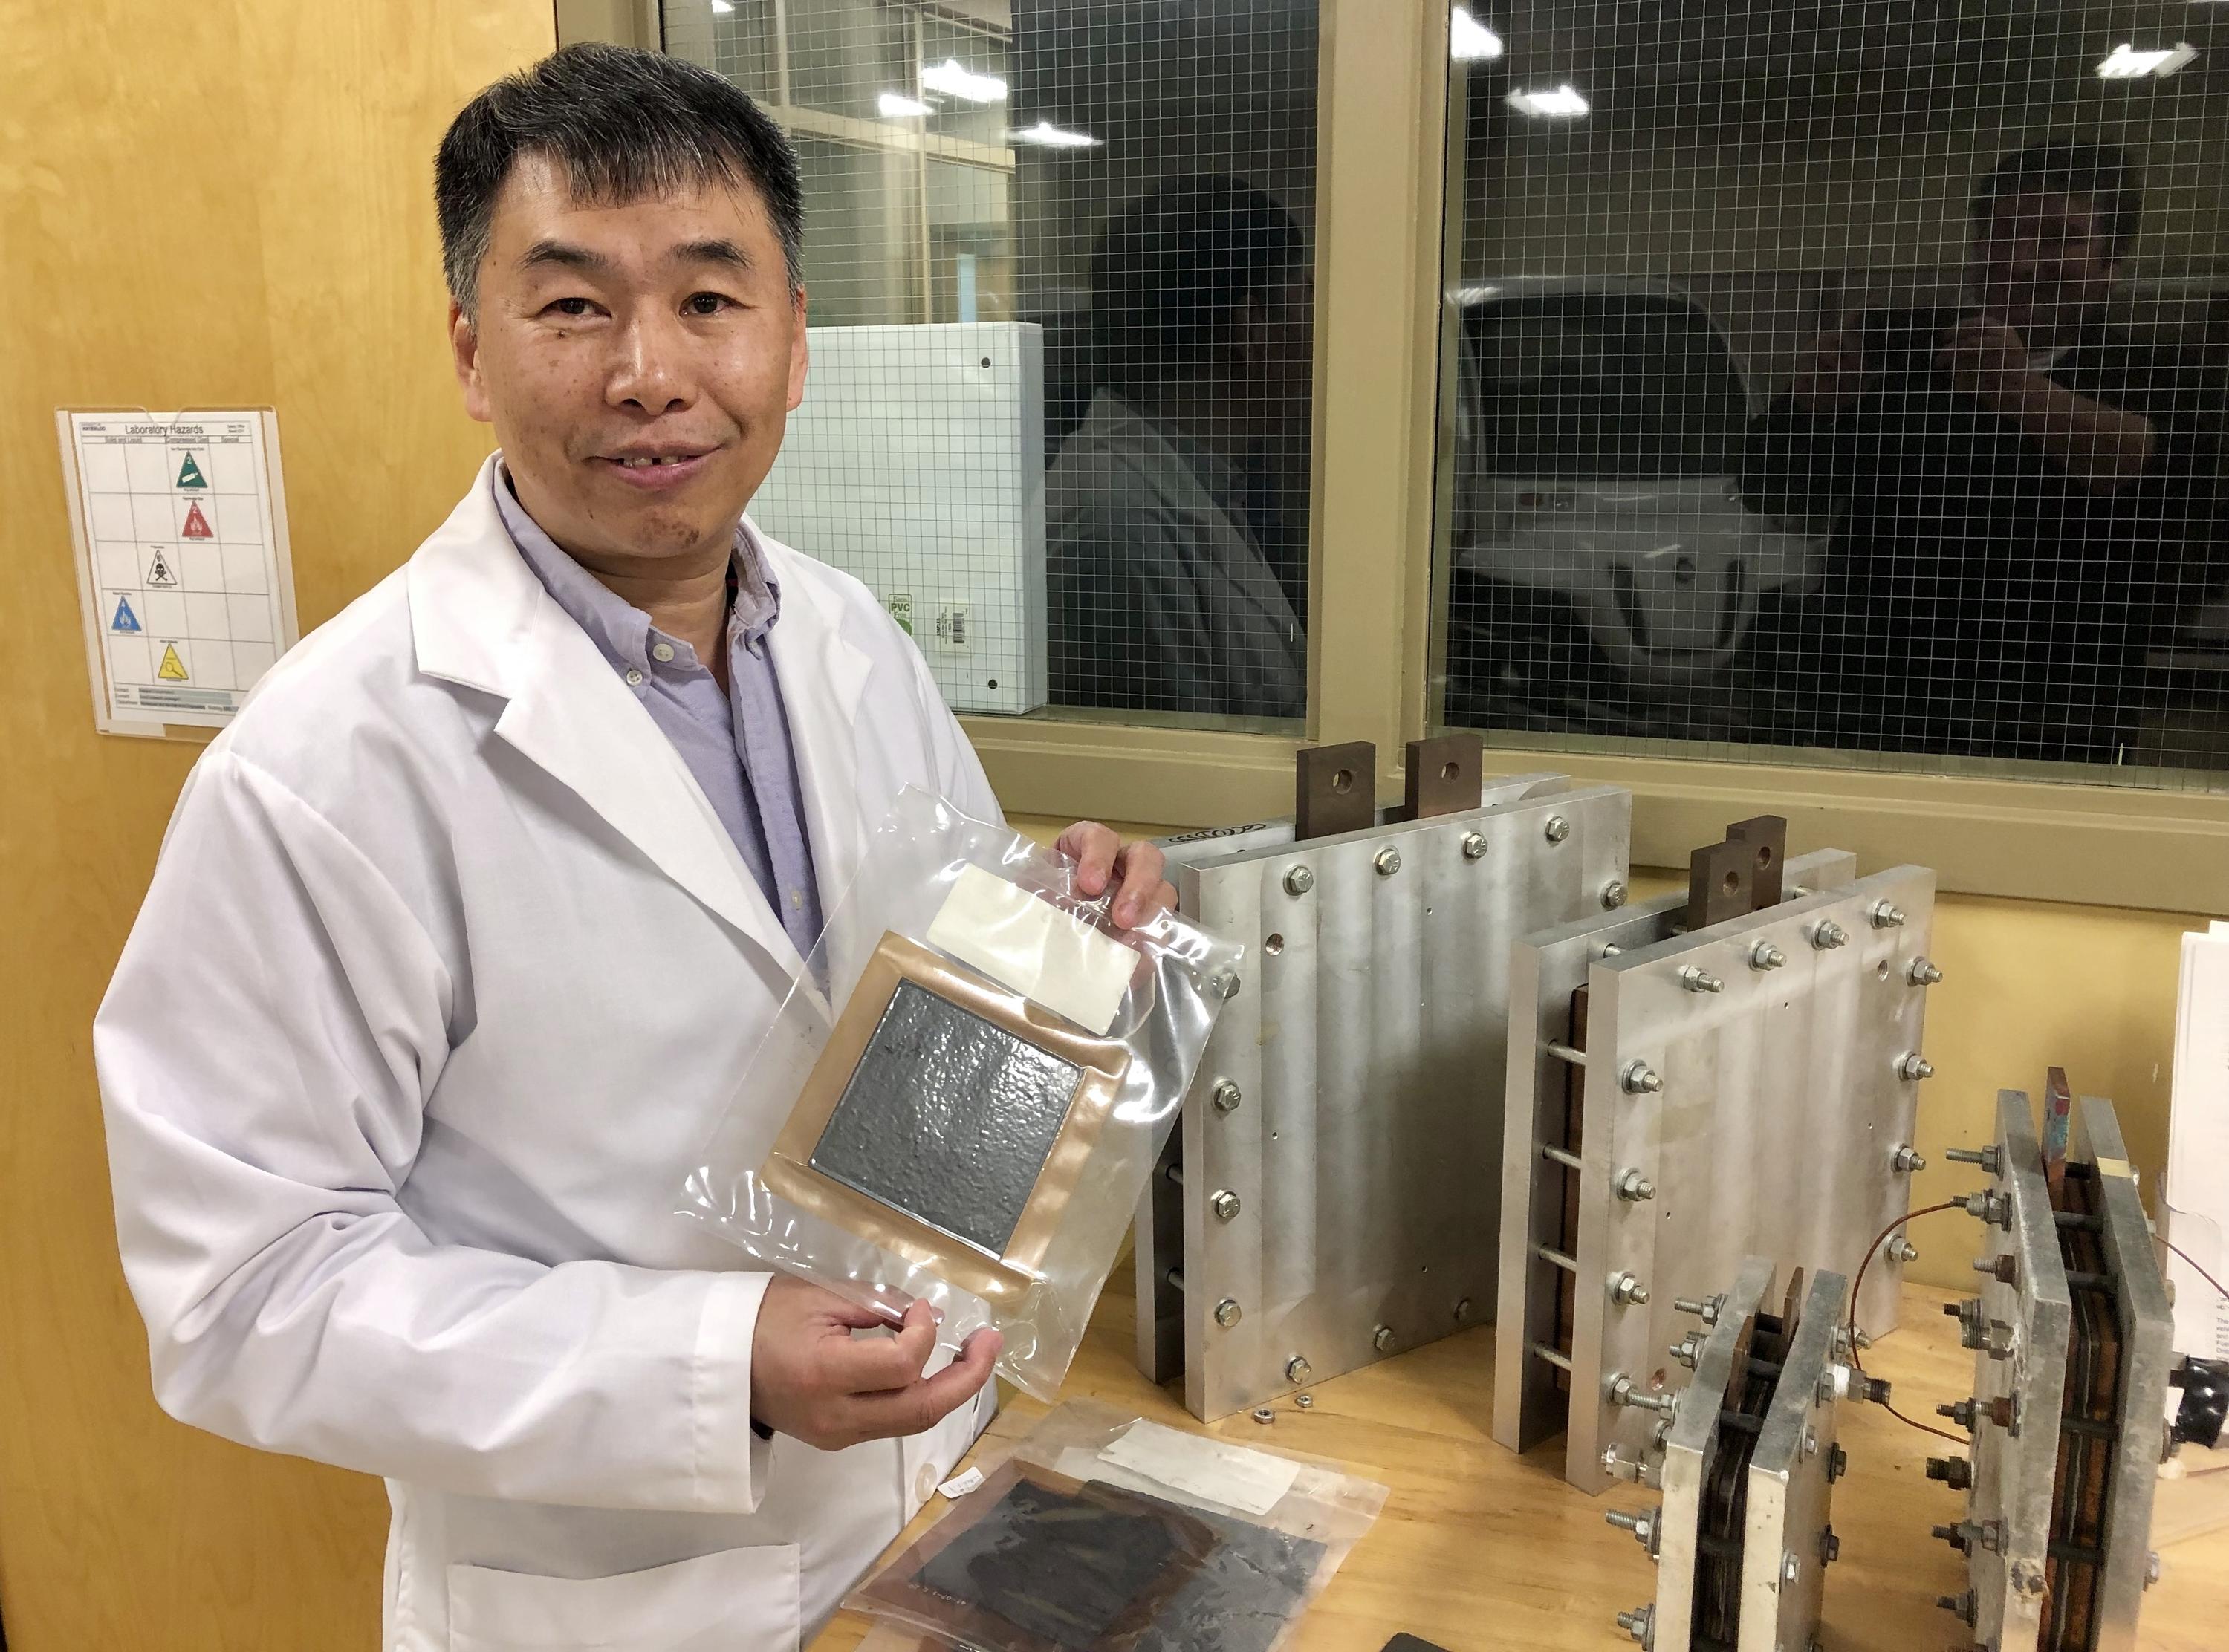 Xianguo Li displays a fuel cell in the Fuel Cell and Green Energy Lab at Waterloo Engineering.